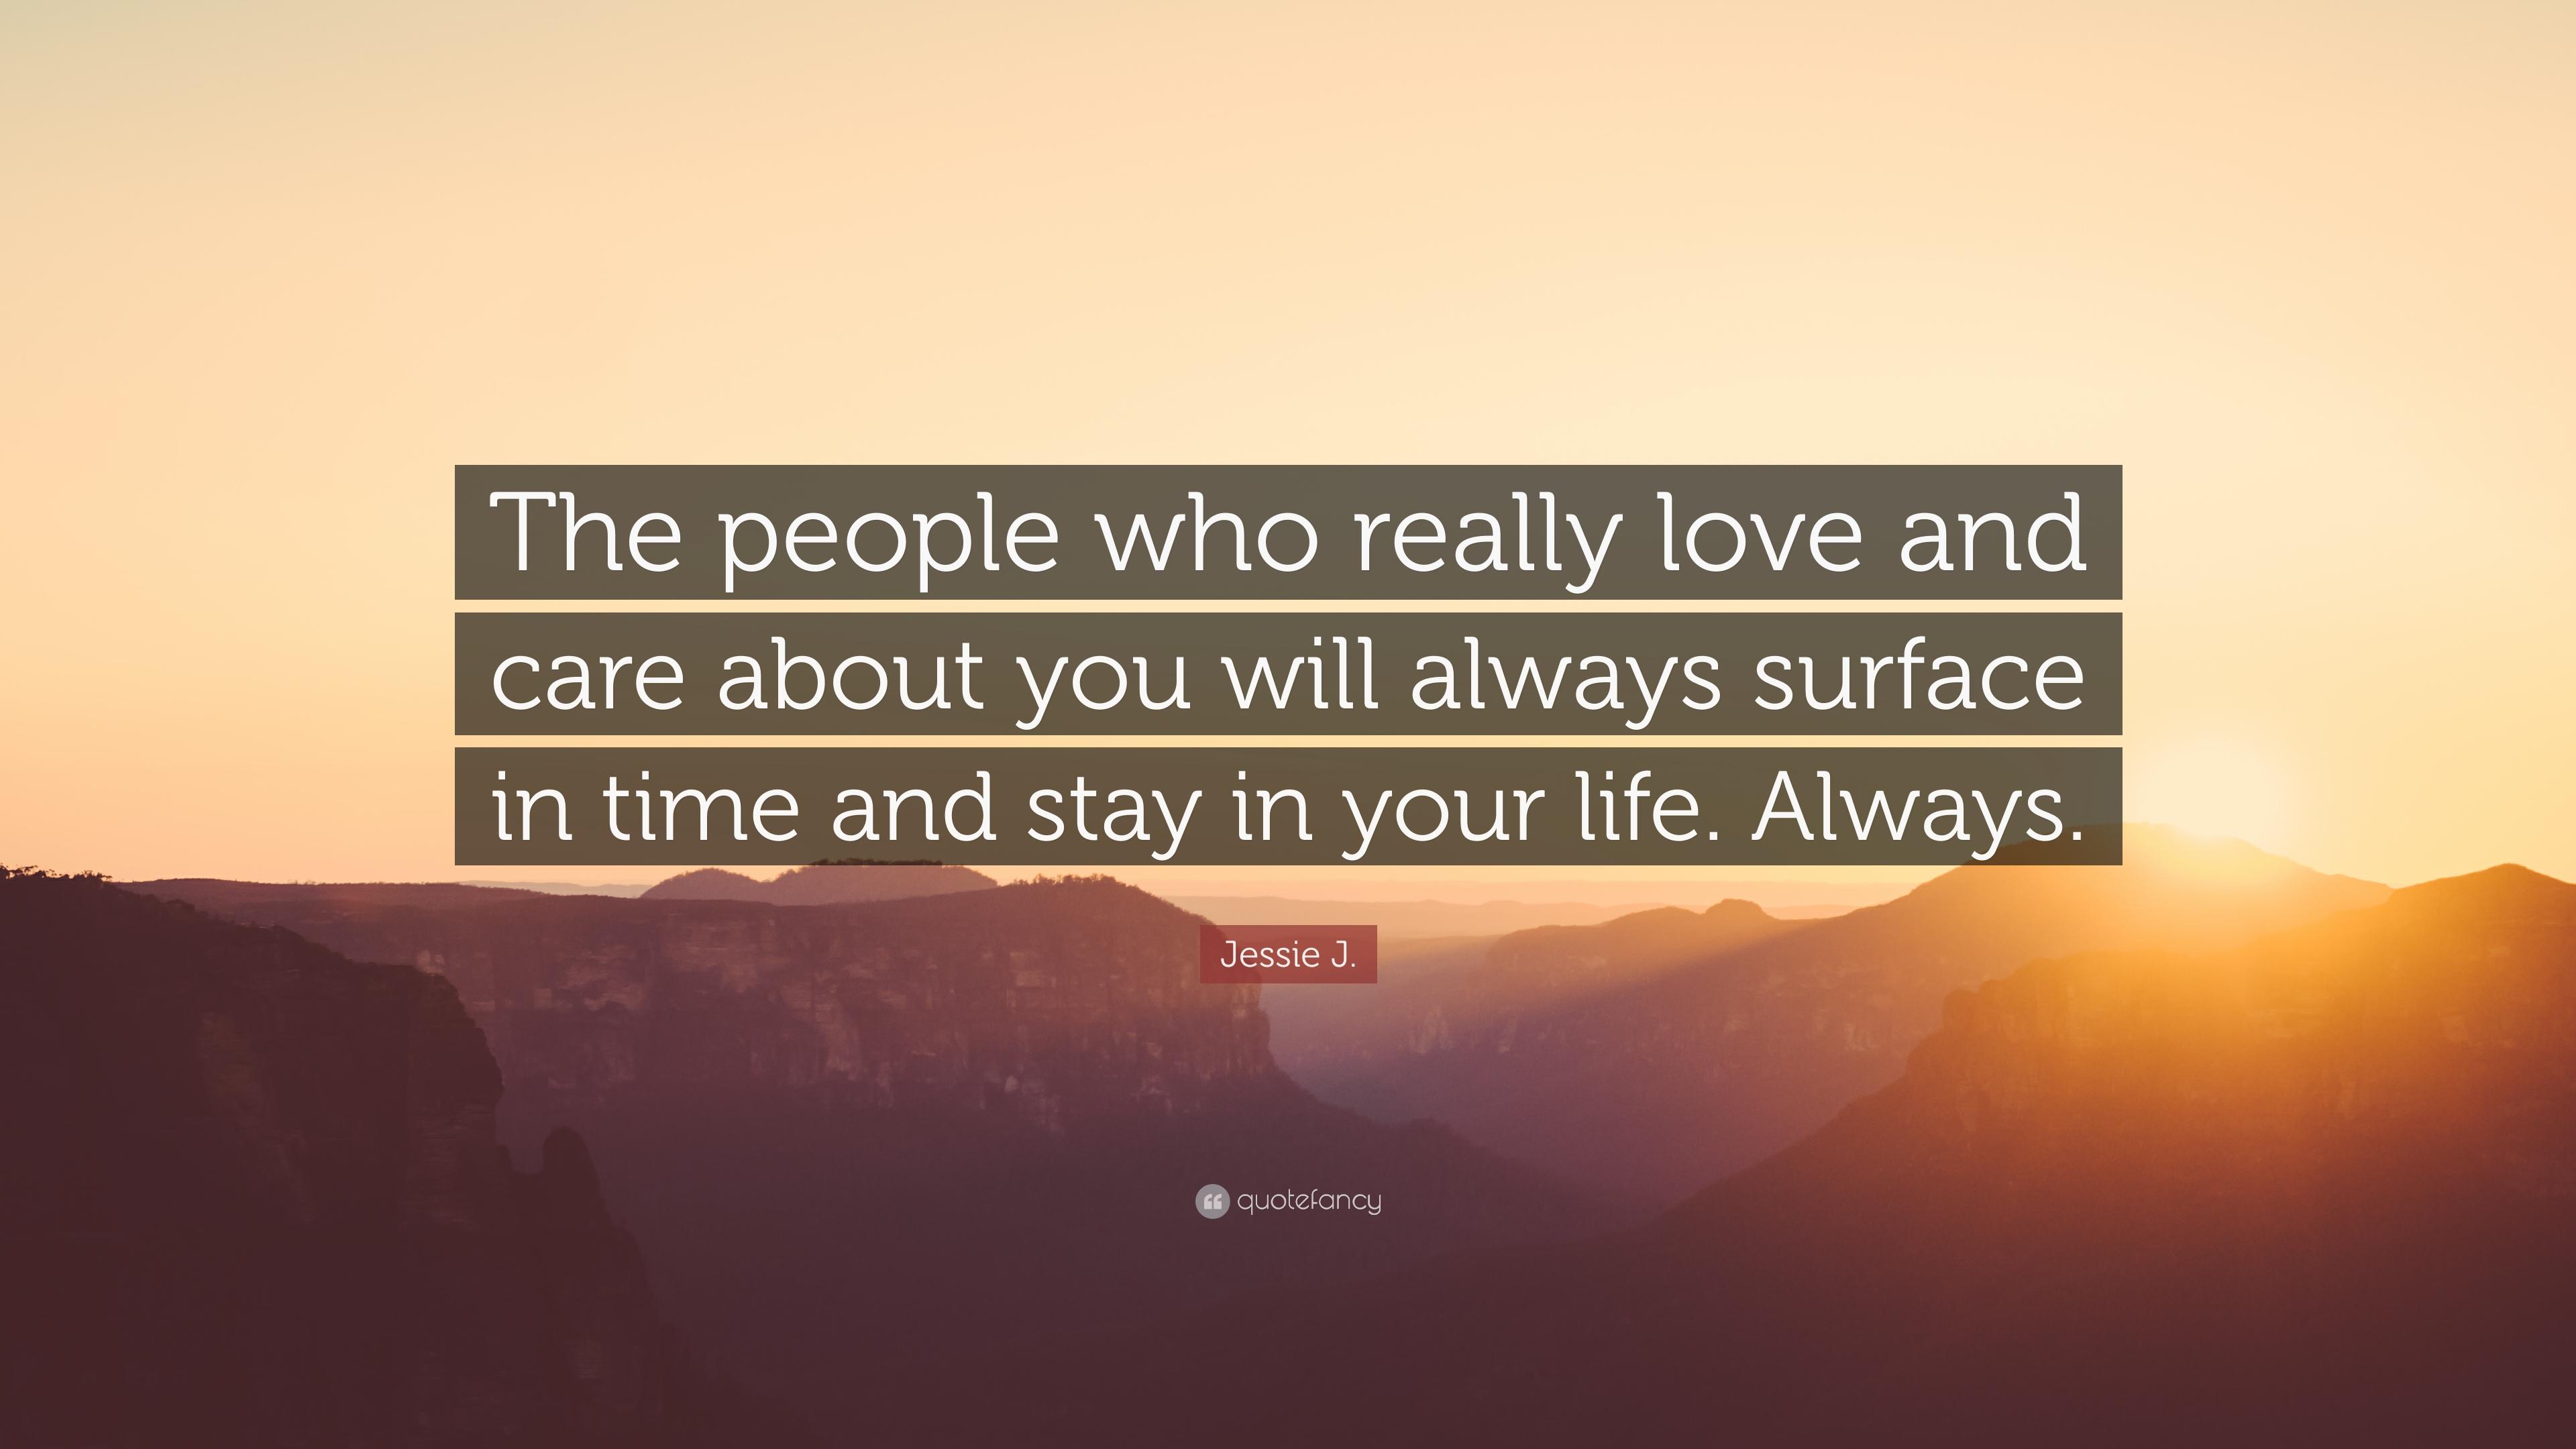 Jessie J. Quote: “The people who really love and care about you